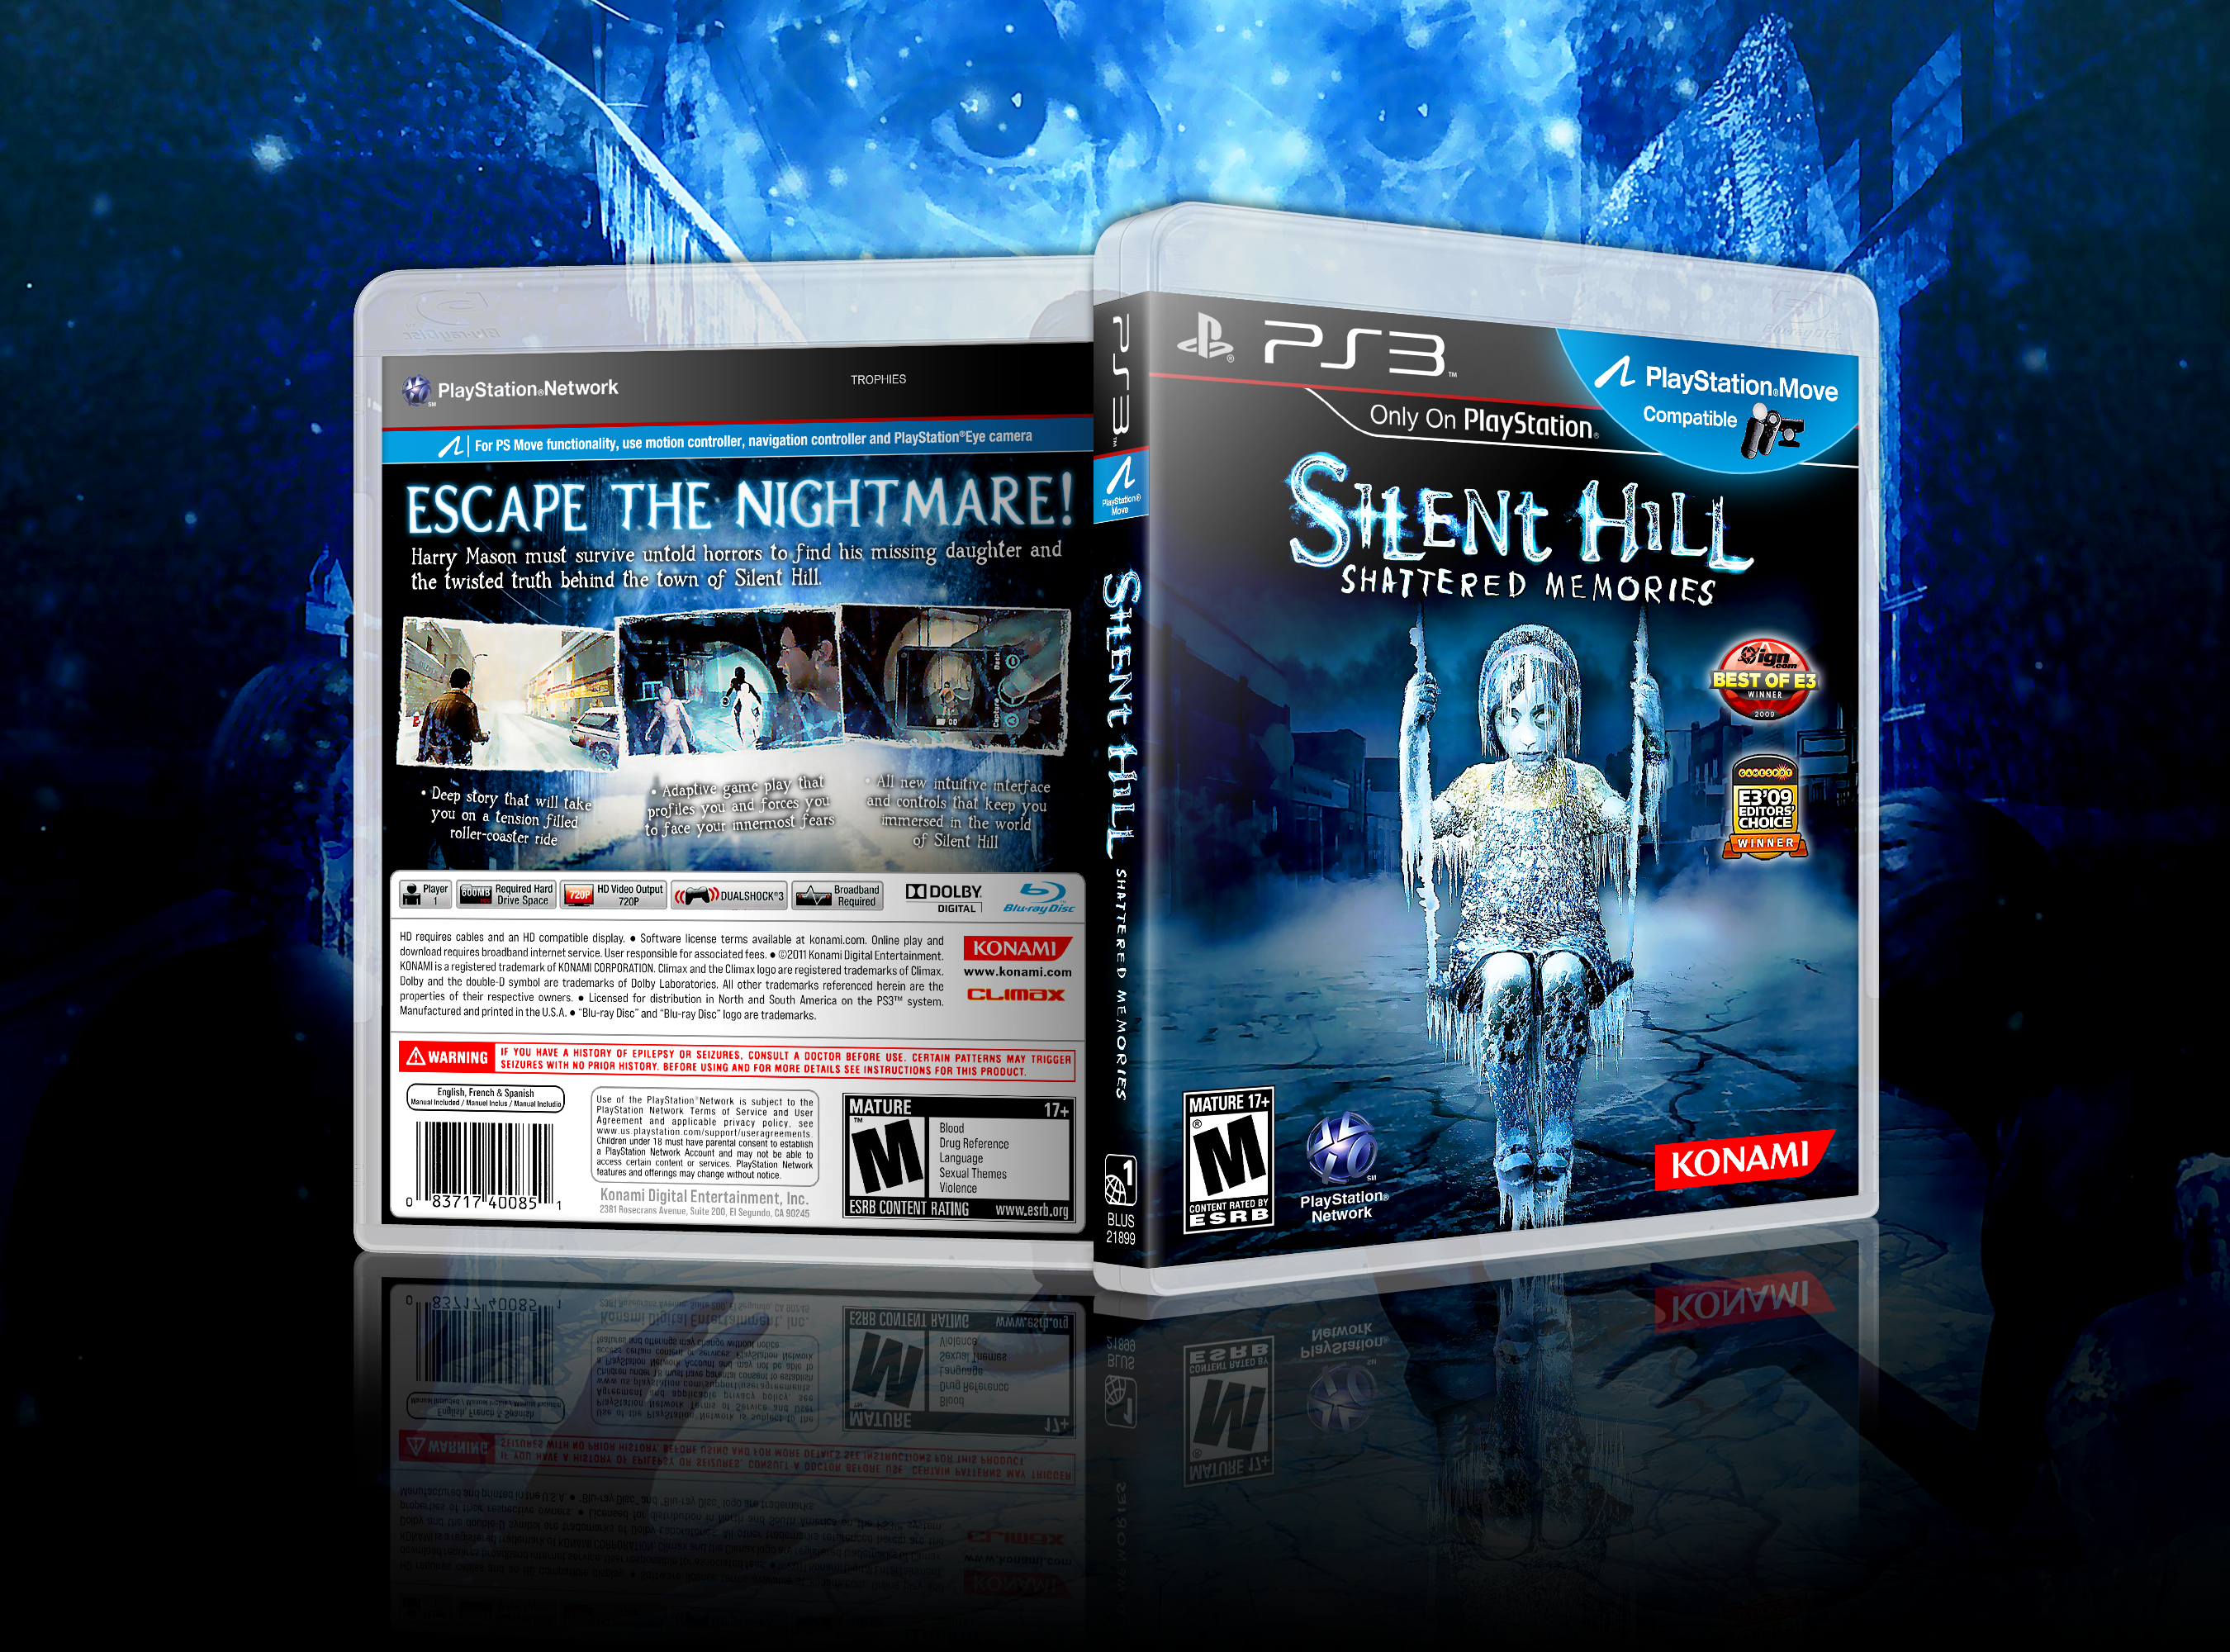 Silent Hill: Shattered Memories box cover